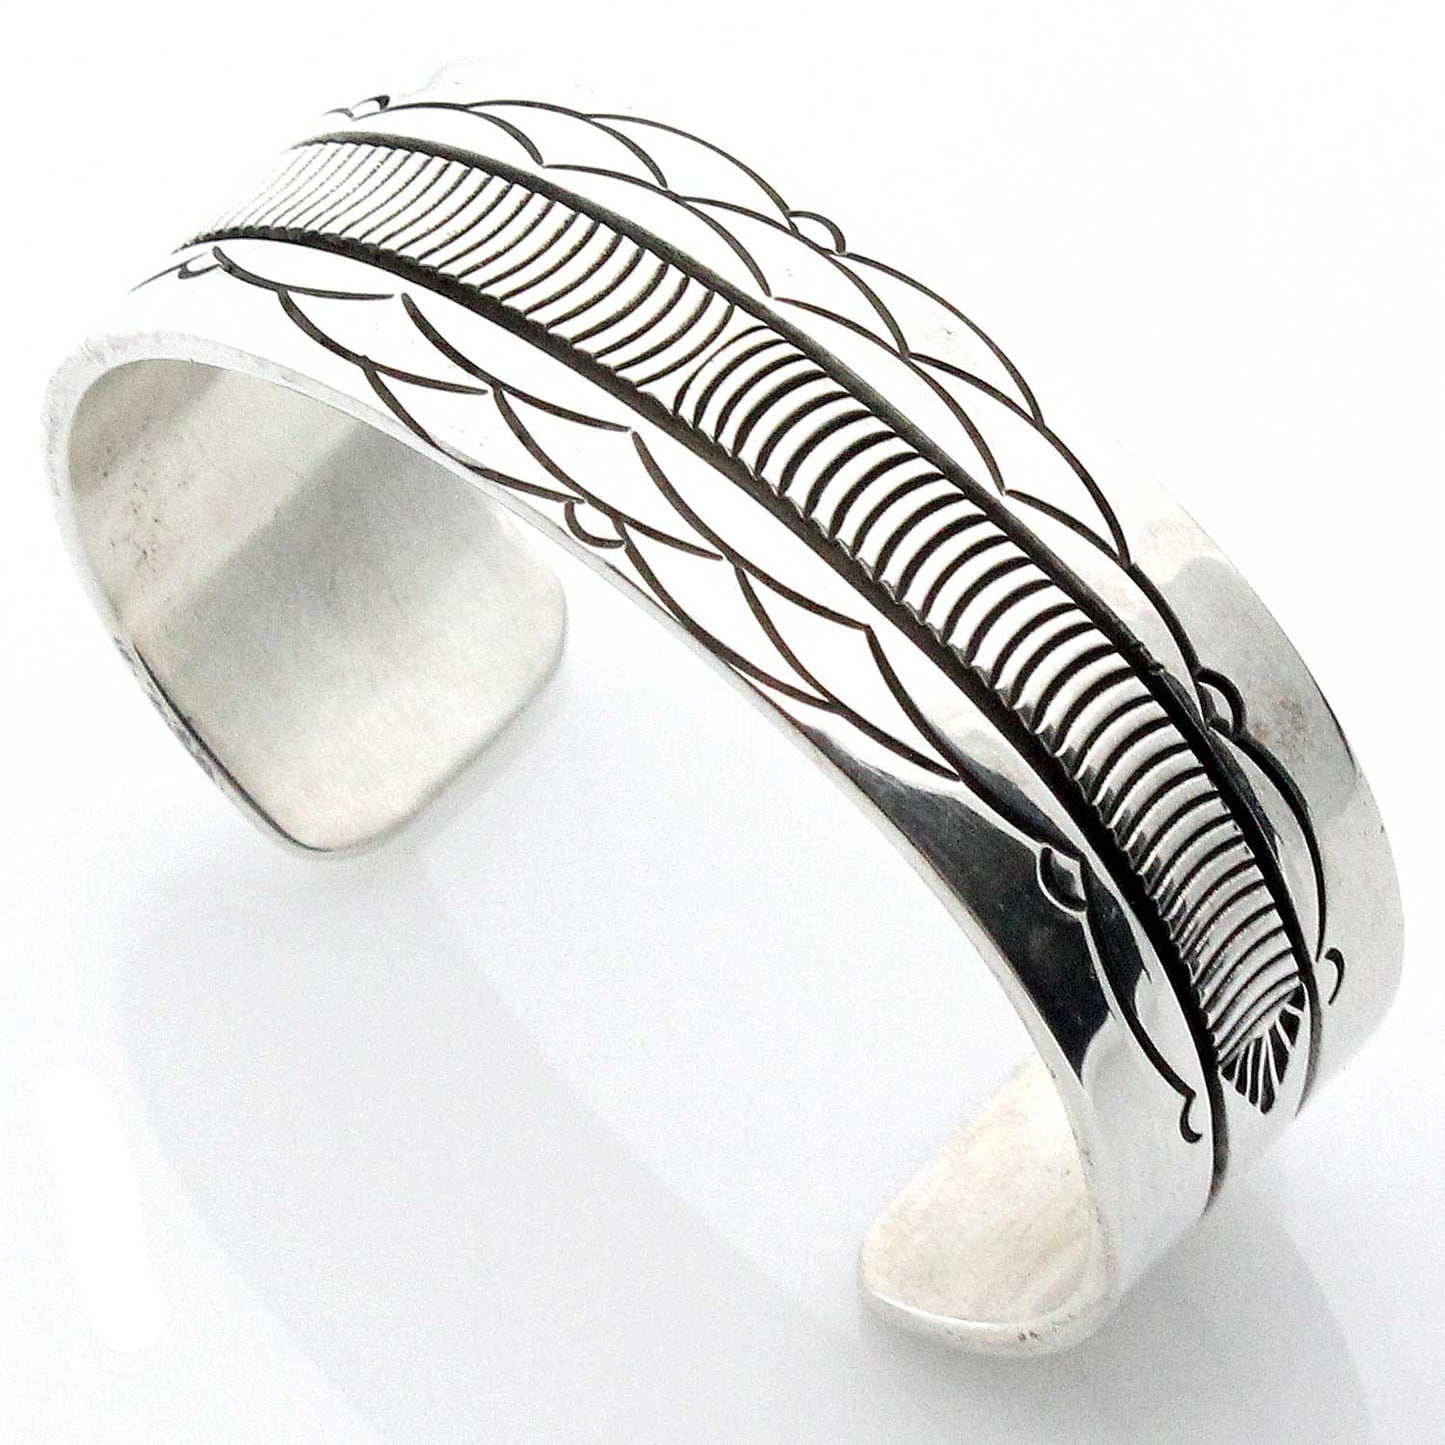 Load image into Gallery viewer, Stamped Silver Bracelet by B. Morgan
